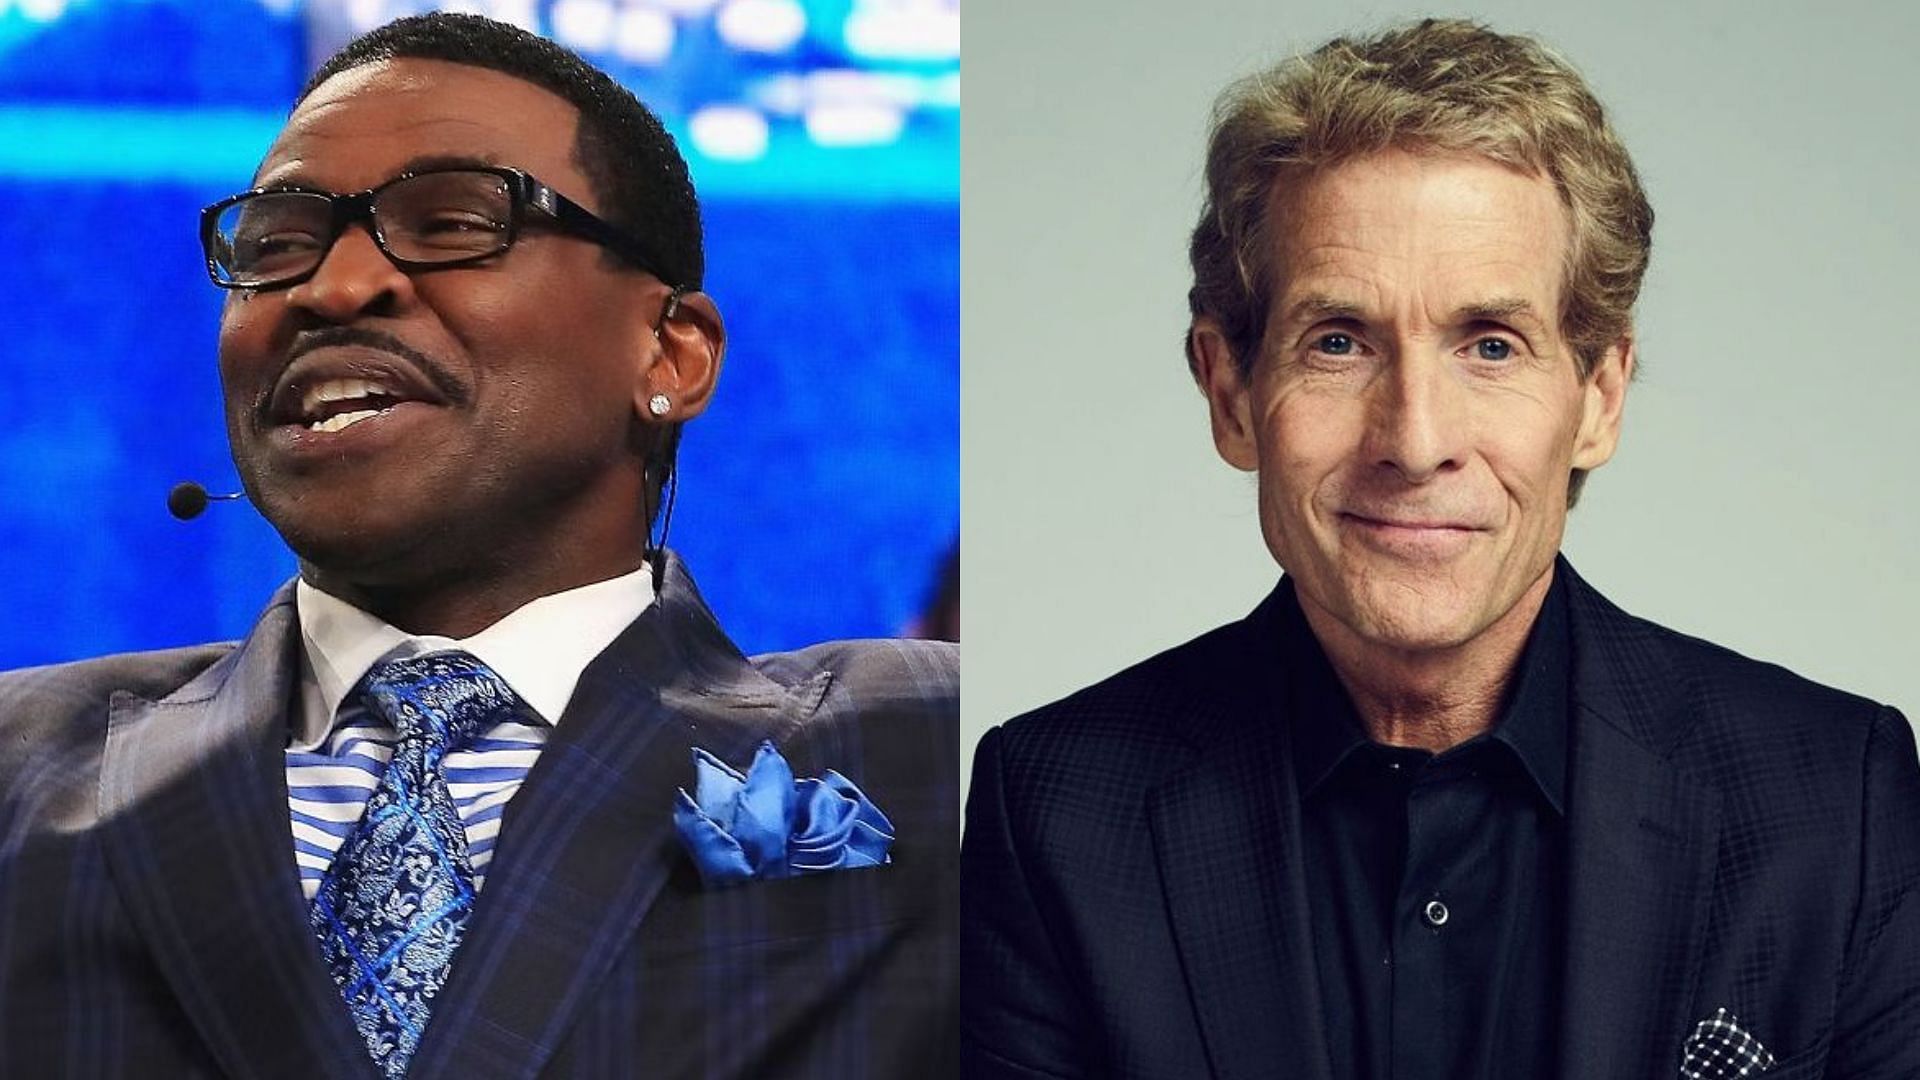 Michael Irvin is feeling the nerves as he joins Skip Bayless in FS1